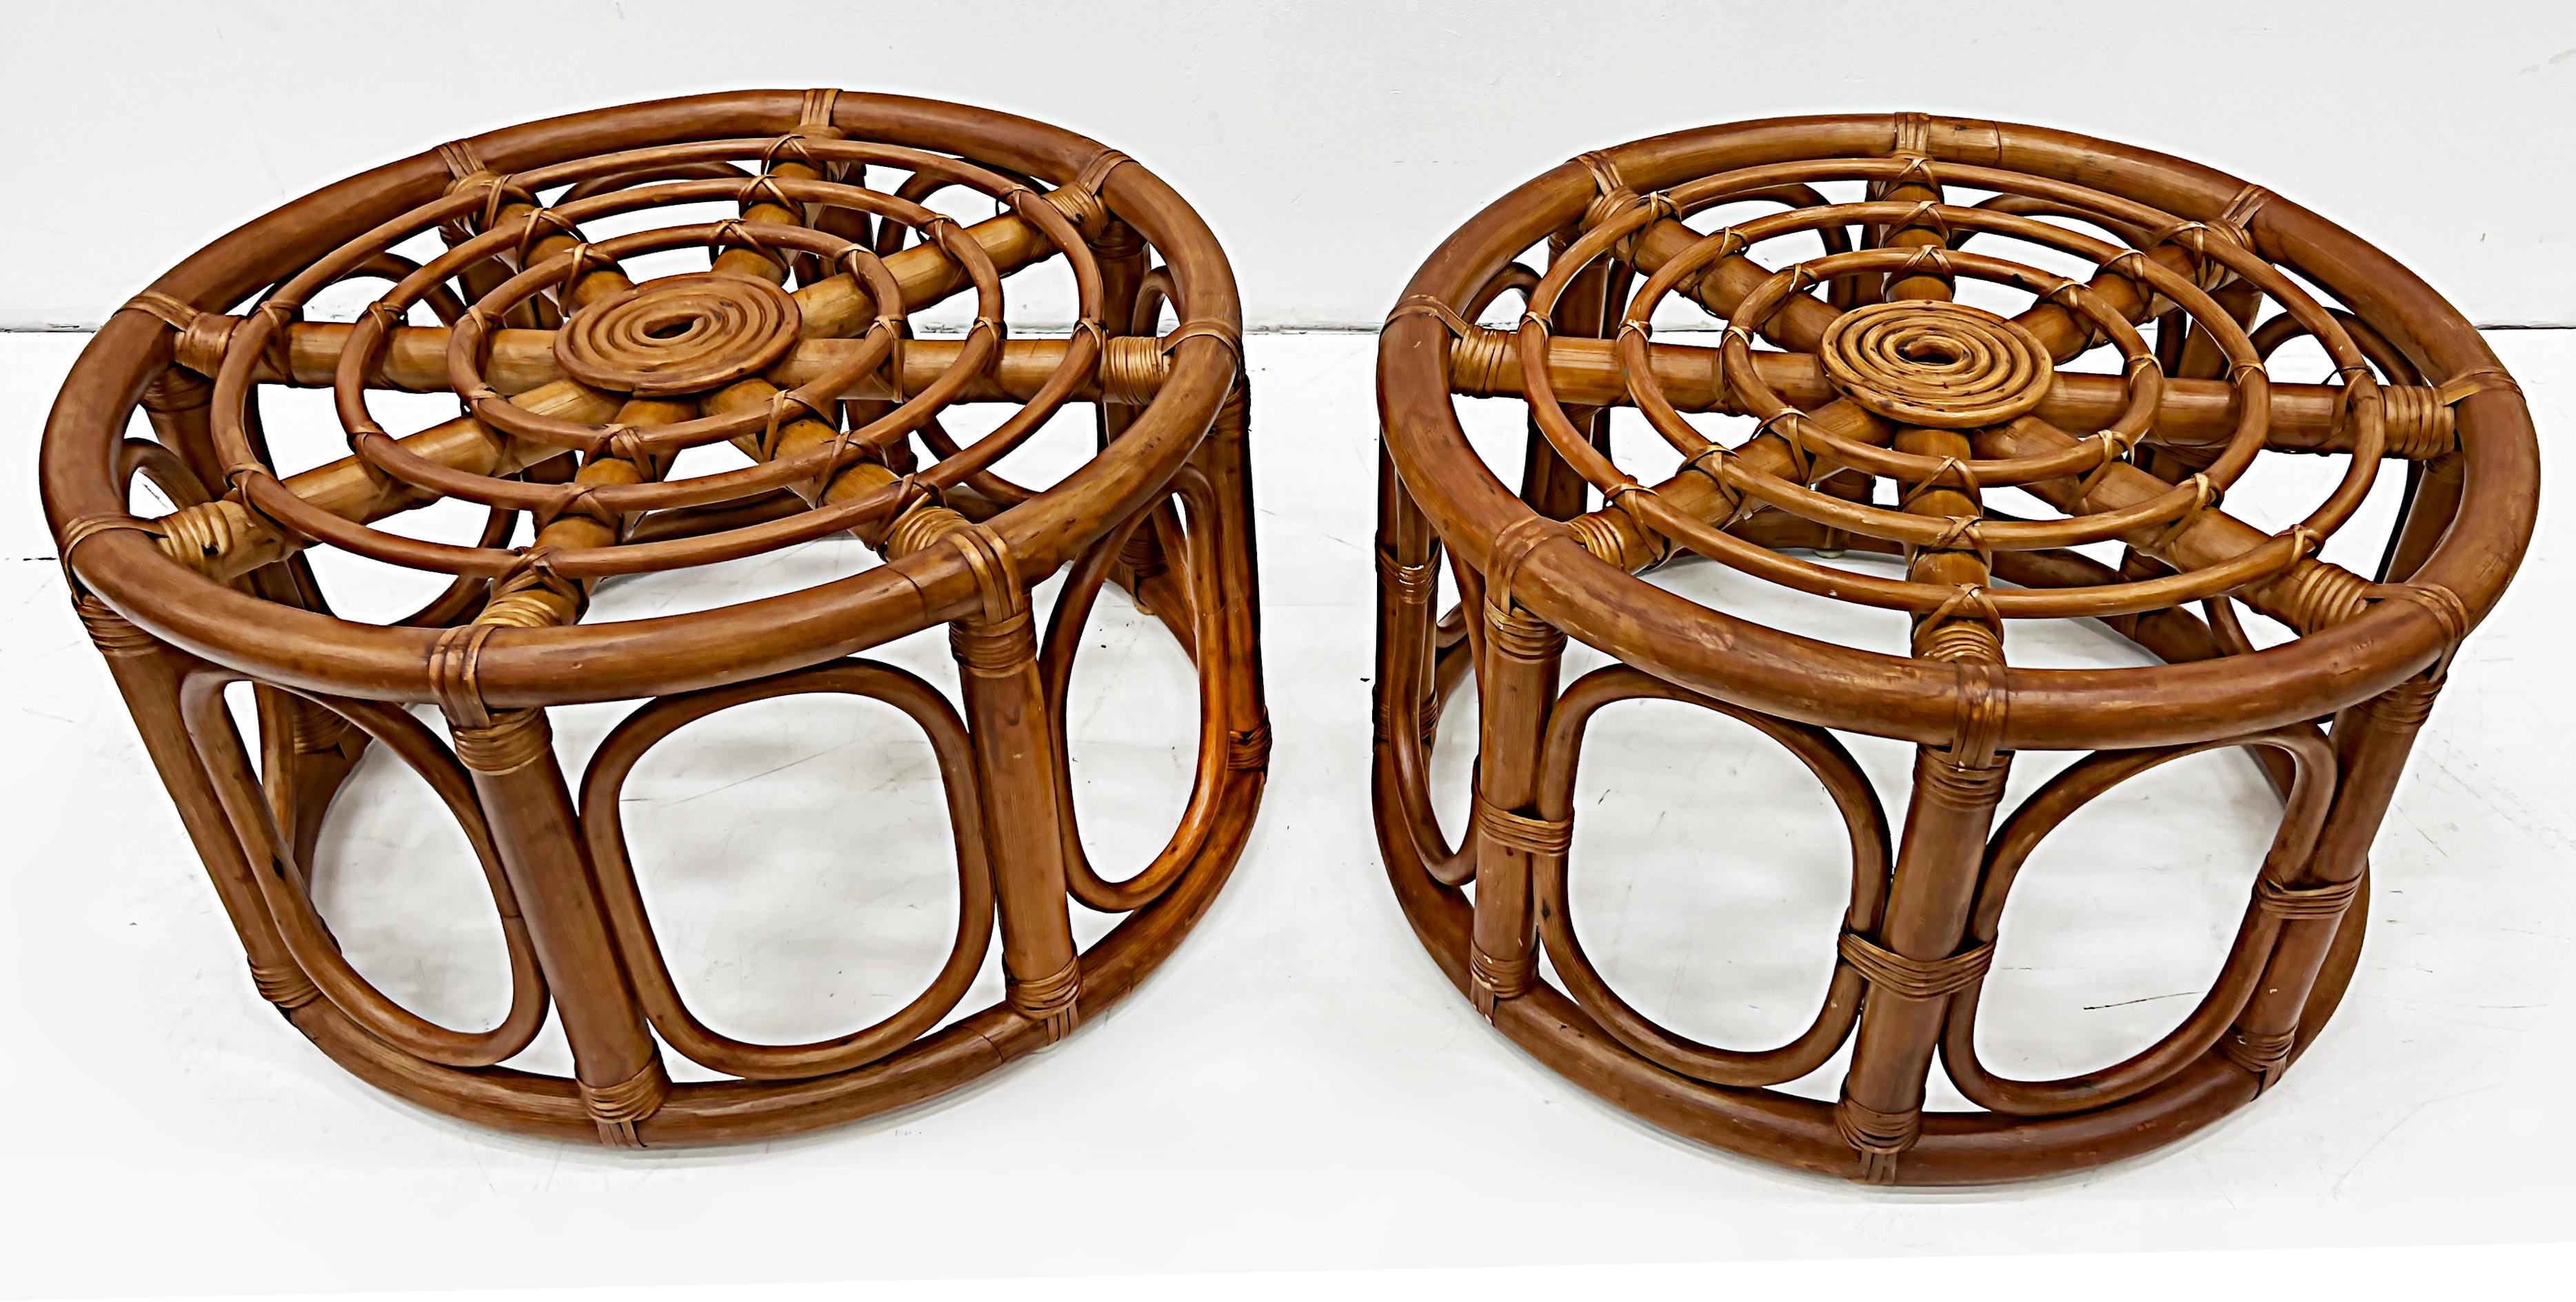 Pair of vintage bent rattan coastal stools or side tables

Offered for sale is a pair of late 20th century bent rattan coastal stools or side tables. These pieces are well crafted and are quite substantial. The stools are generous in size and